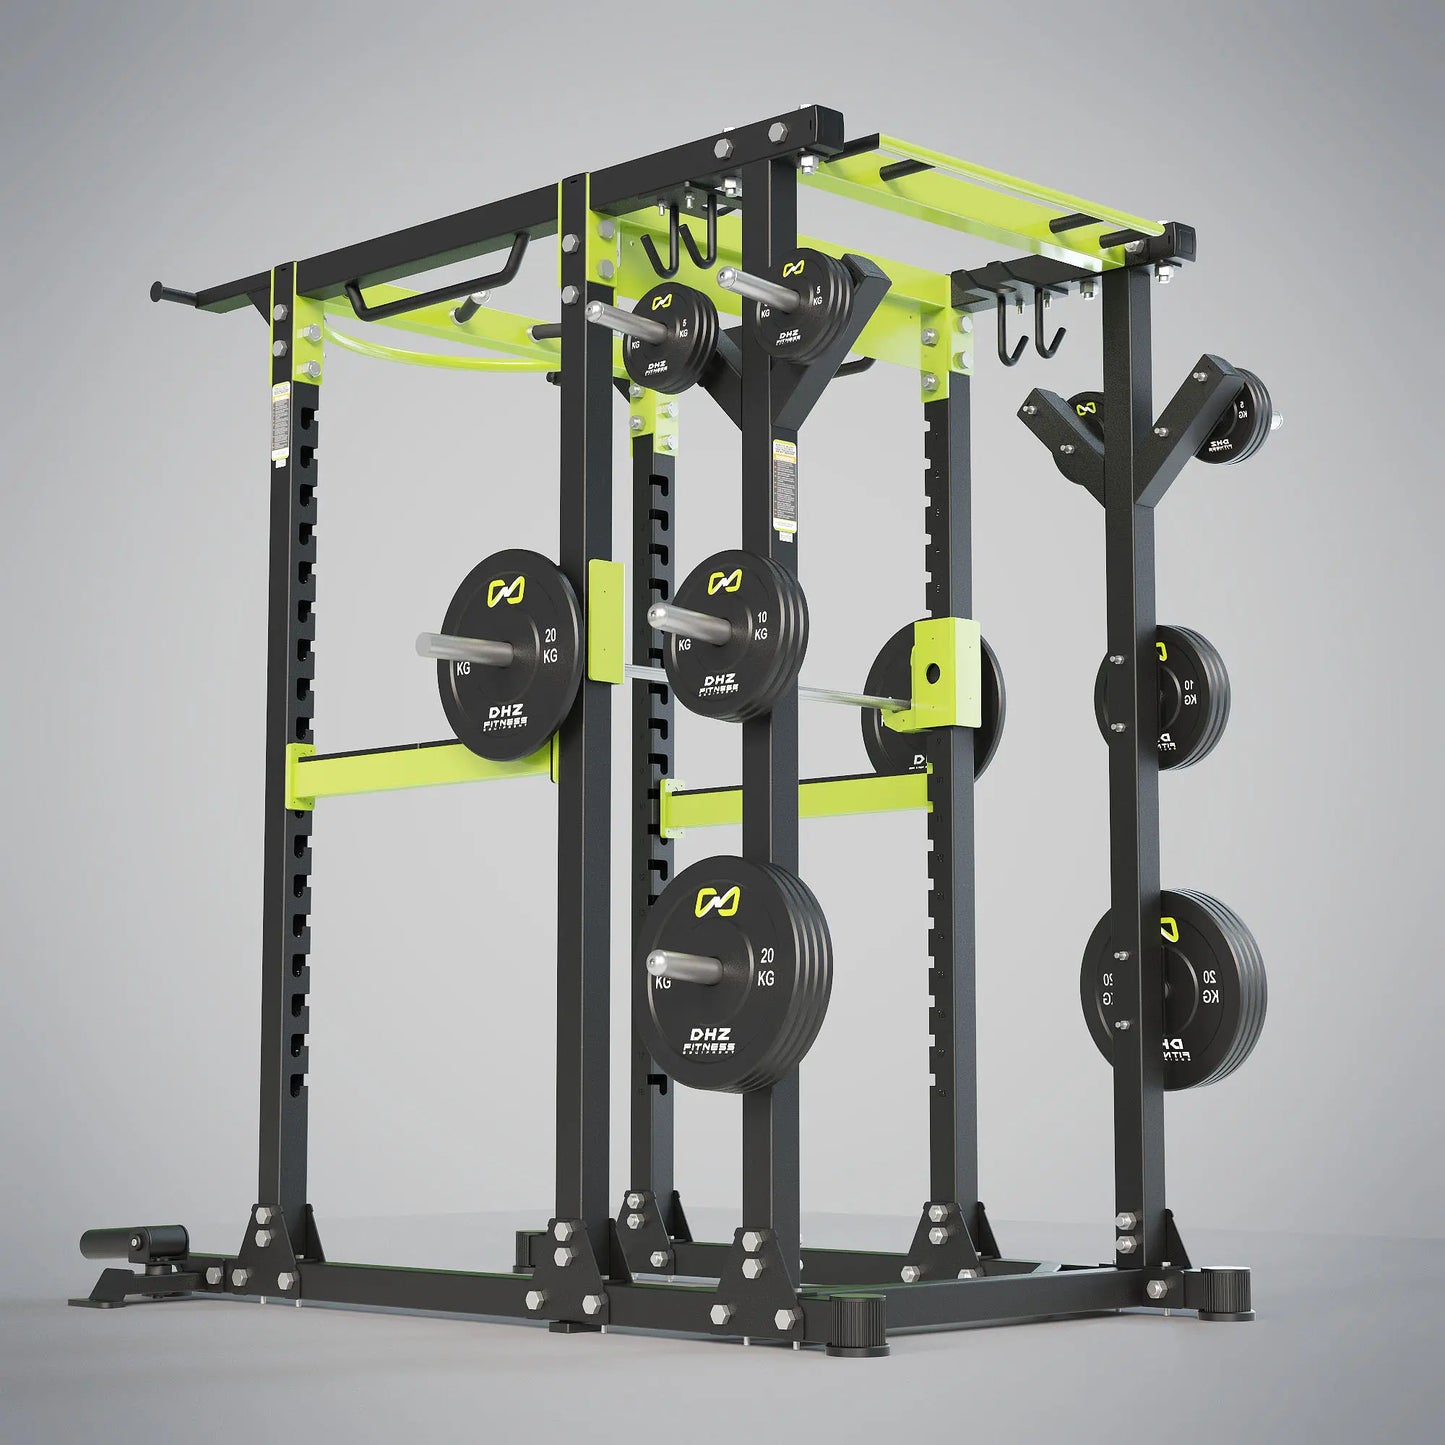 Gamma Fitness Commercial Multi Power Rack CPR-40 For Commercial Gym Setup